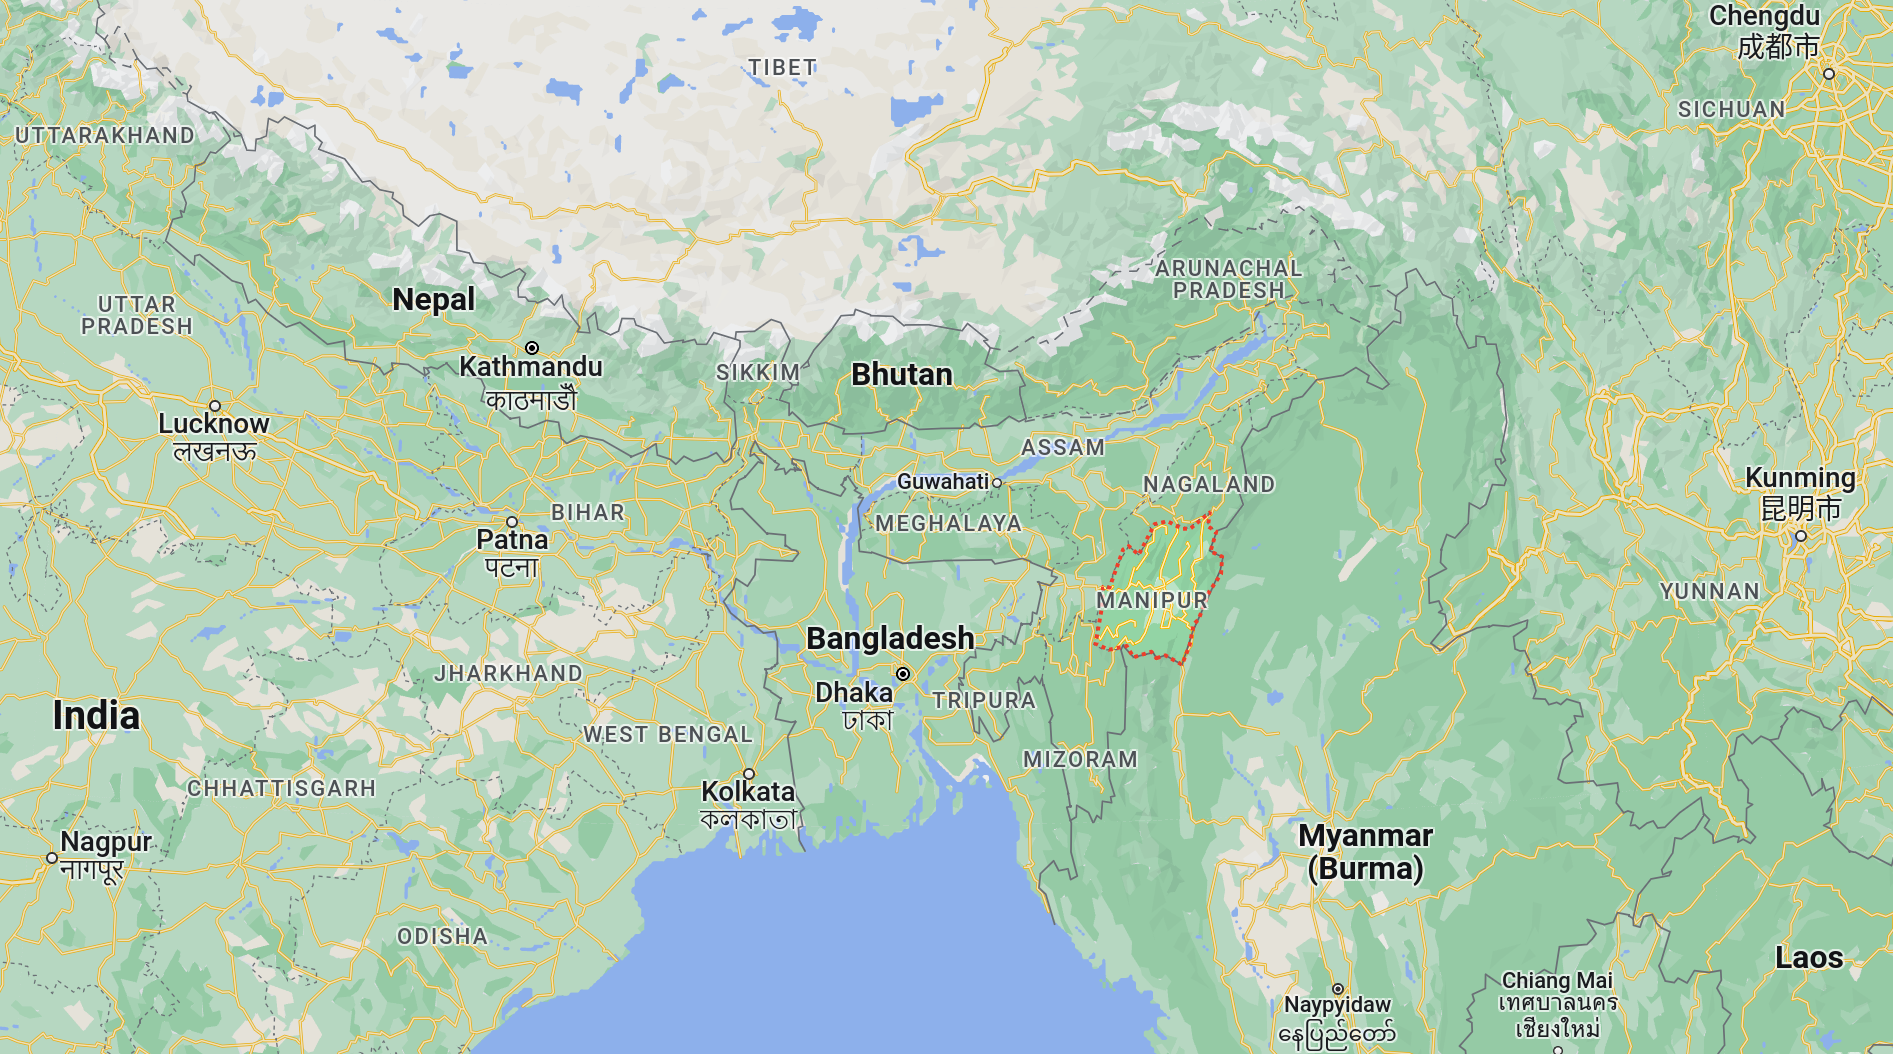 Location of Manipur in India adjacent to Myanmar (Source: Google Maps)